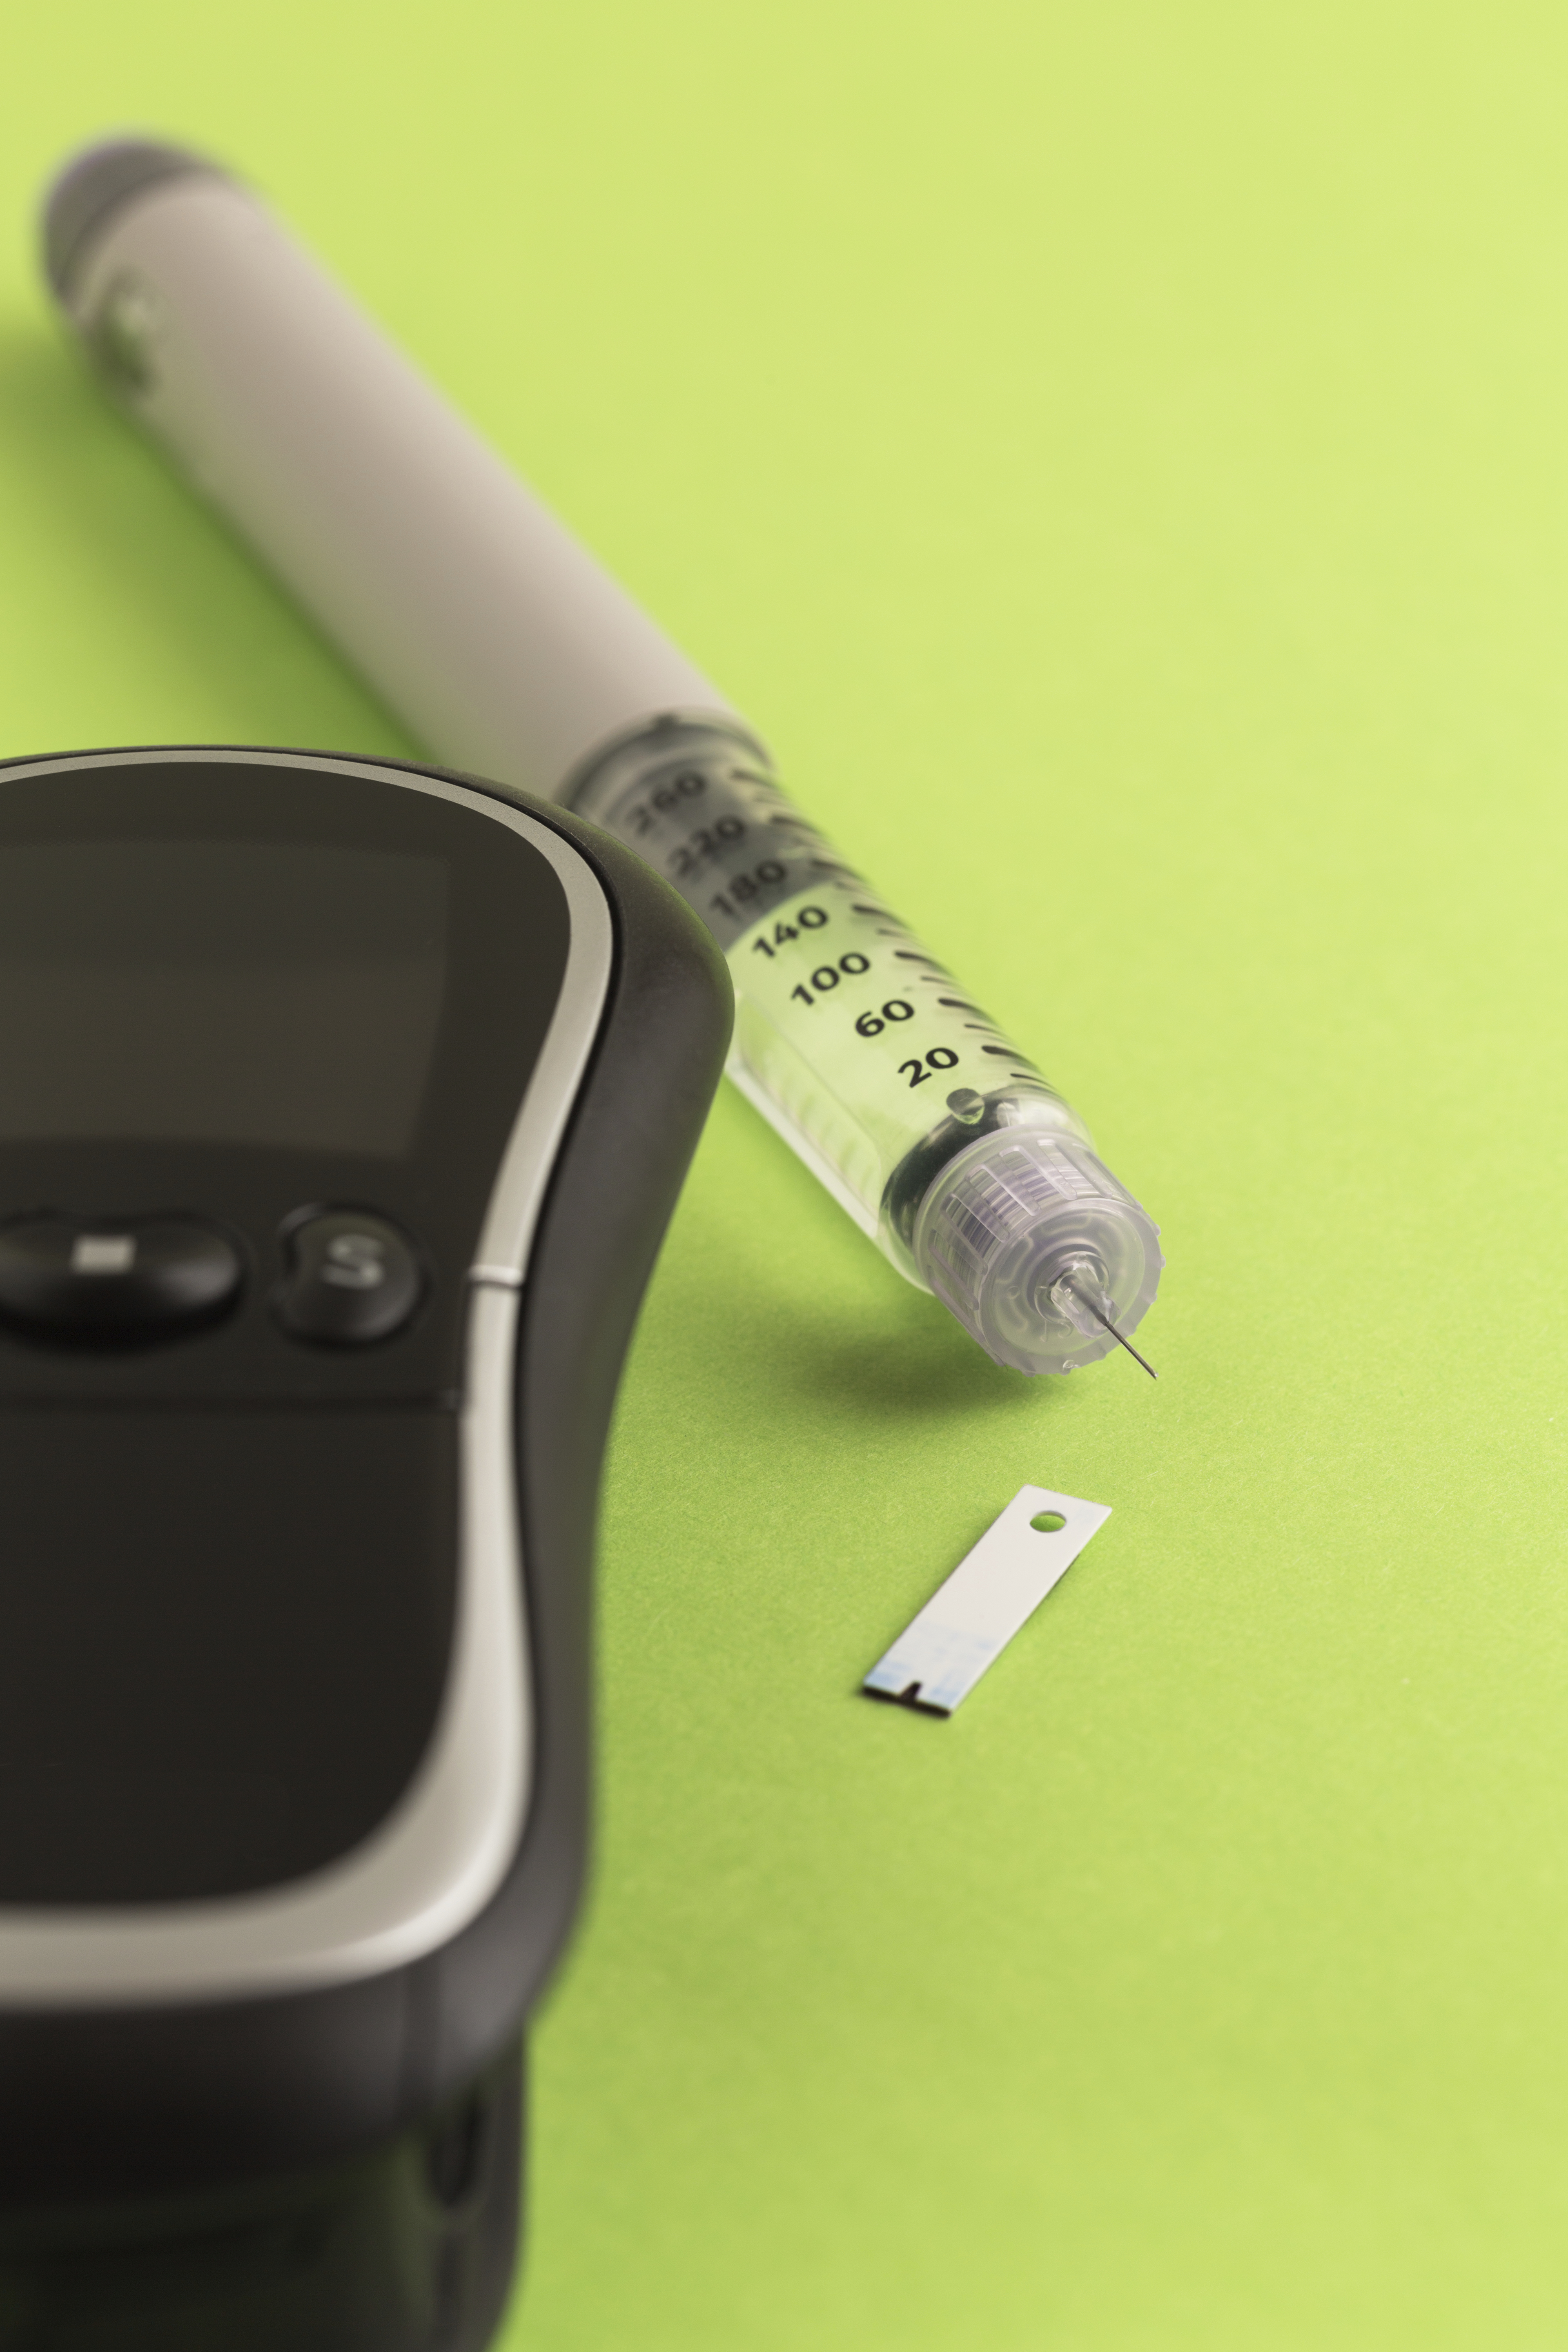 New AMA, CDC Initiative Aims to “Prevent Diabetes STAT”